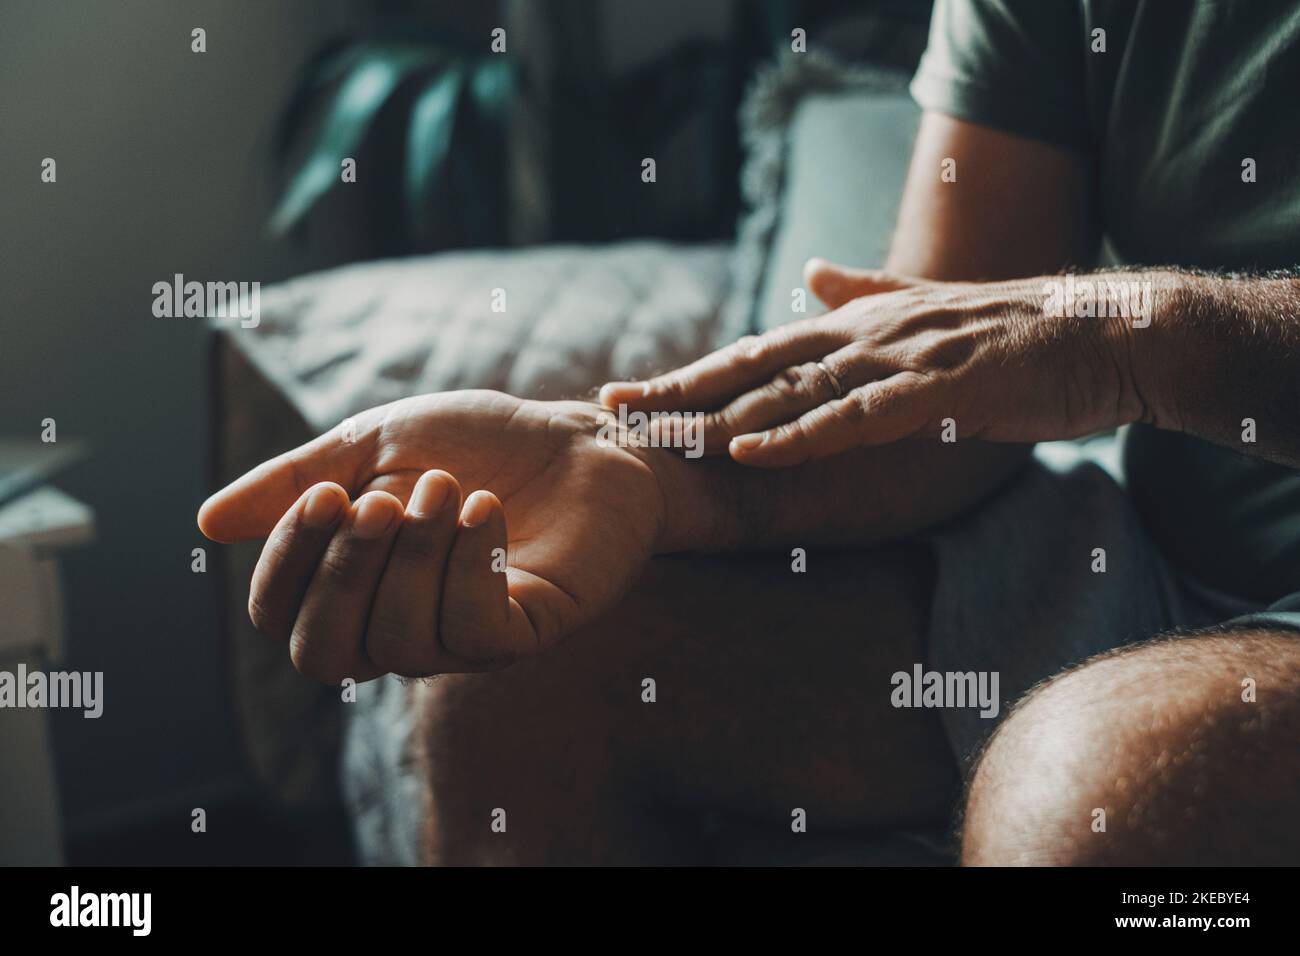 Articulation and writs pain health problems concept with man holding his wrist. Close up of bad body condition concept at home. After exercise prblems on arm and hands. Arthrosis and age Stock Photo